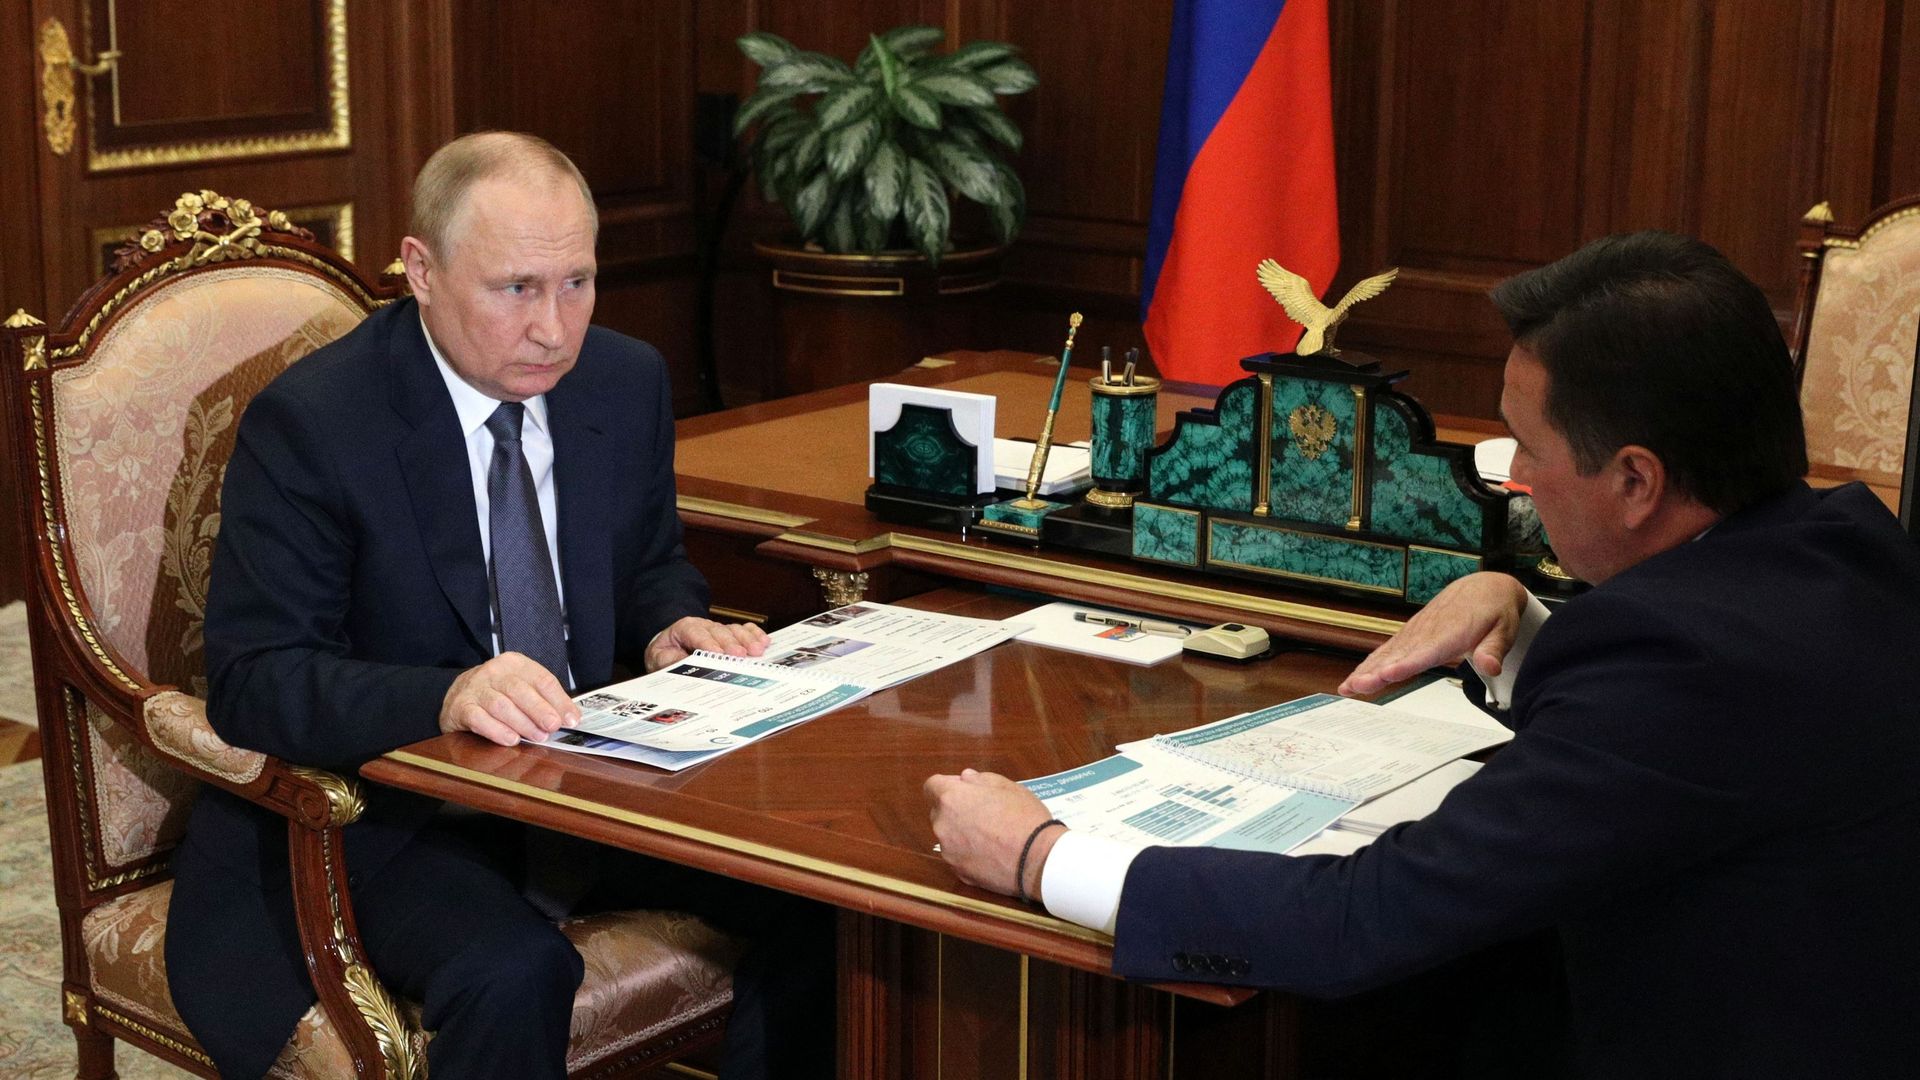 Vladimir Putin meets at the Kremlin yesterday with Andrei Vorobyov, governor of the Moscow region.